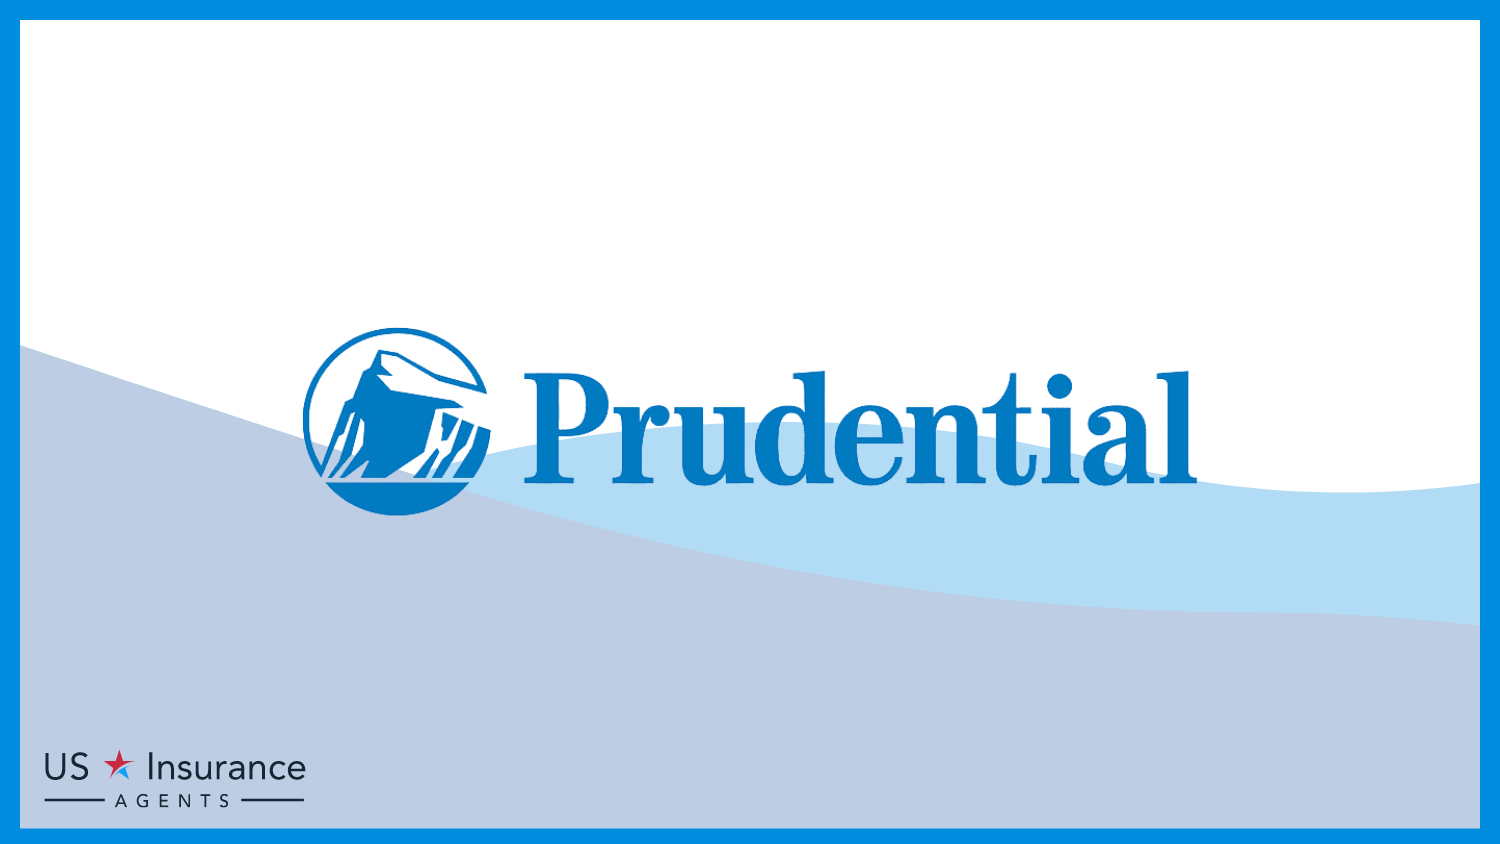 Prudential: Best Life Insurance for Nurses